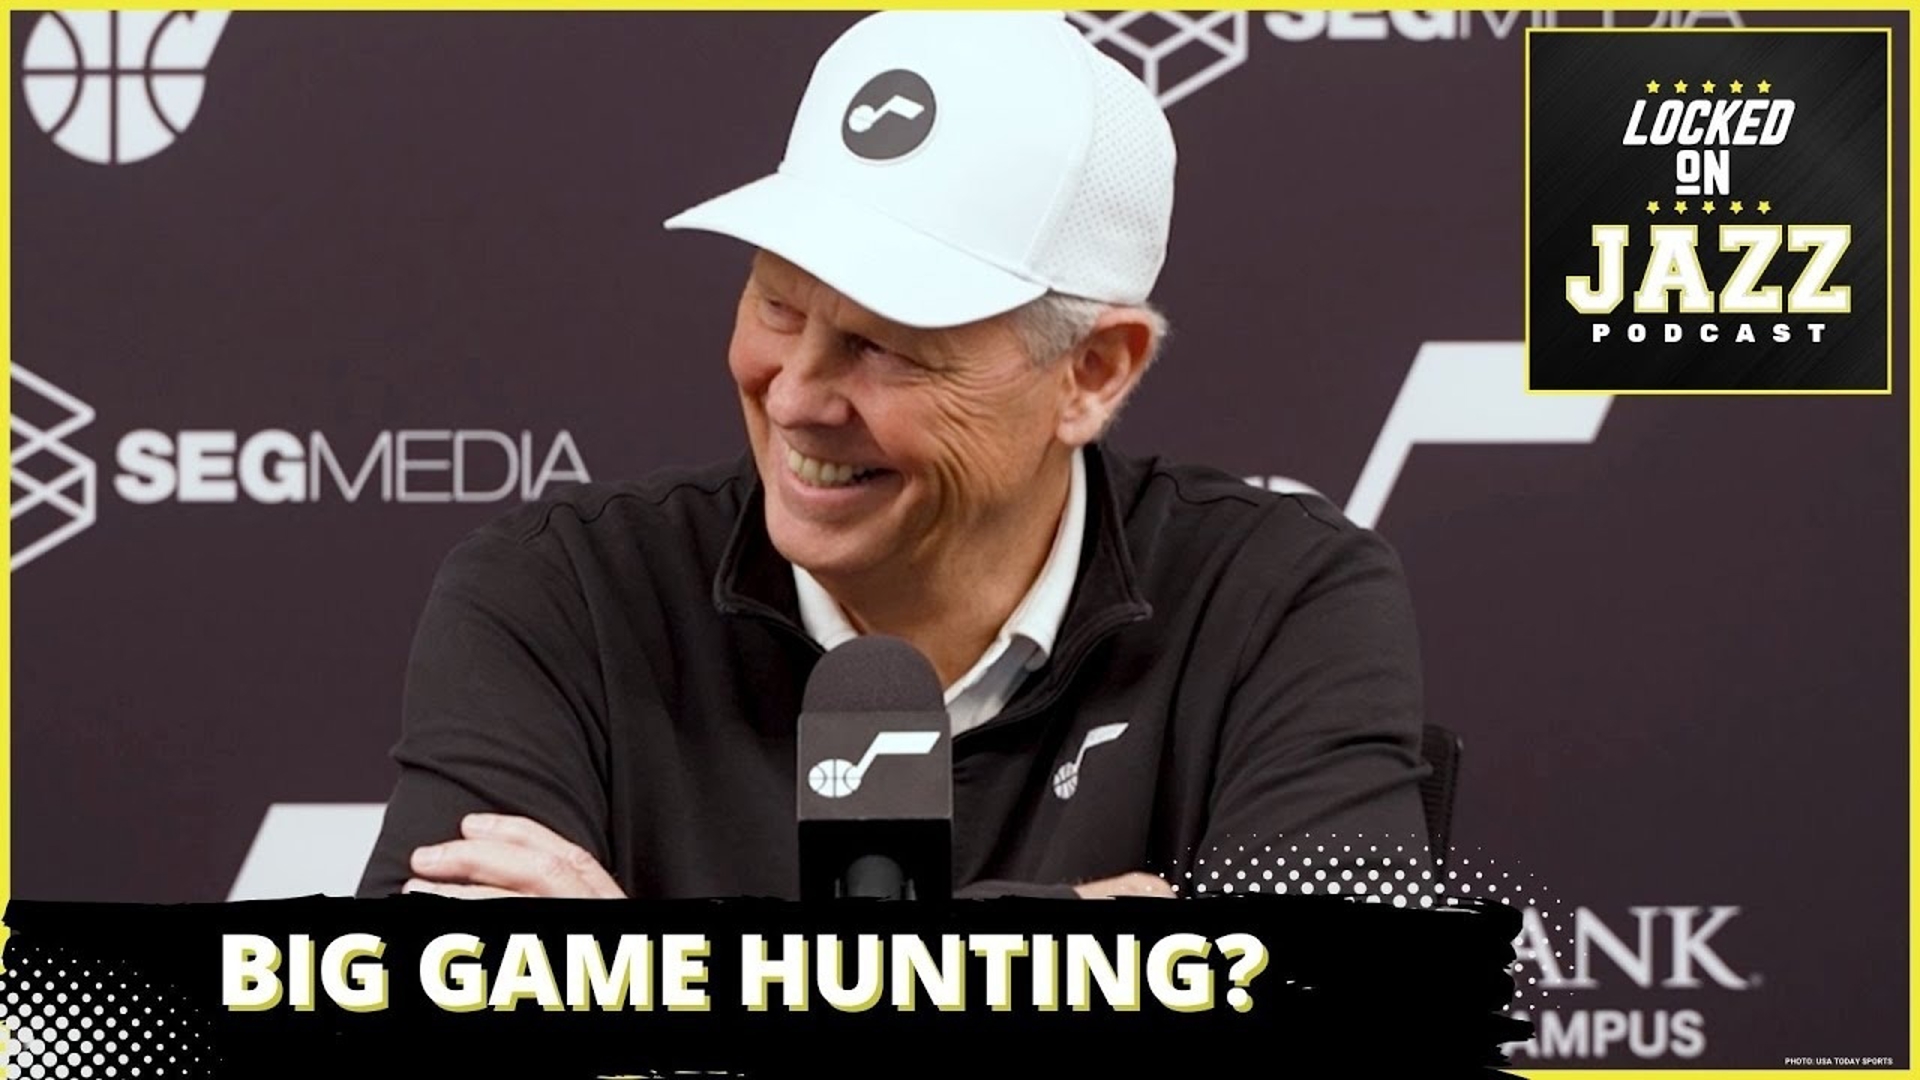 Leif Thulin explores what does the phrase uttered by Danny Ainge saying the Jazz will go "Big Game Hunting" truly entail.